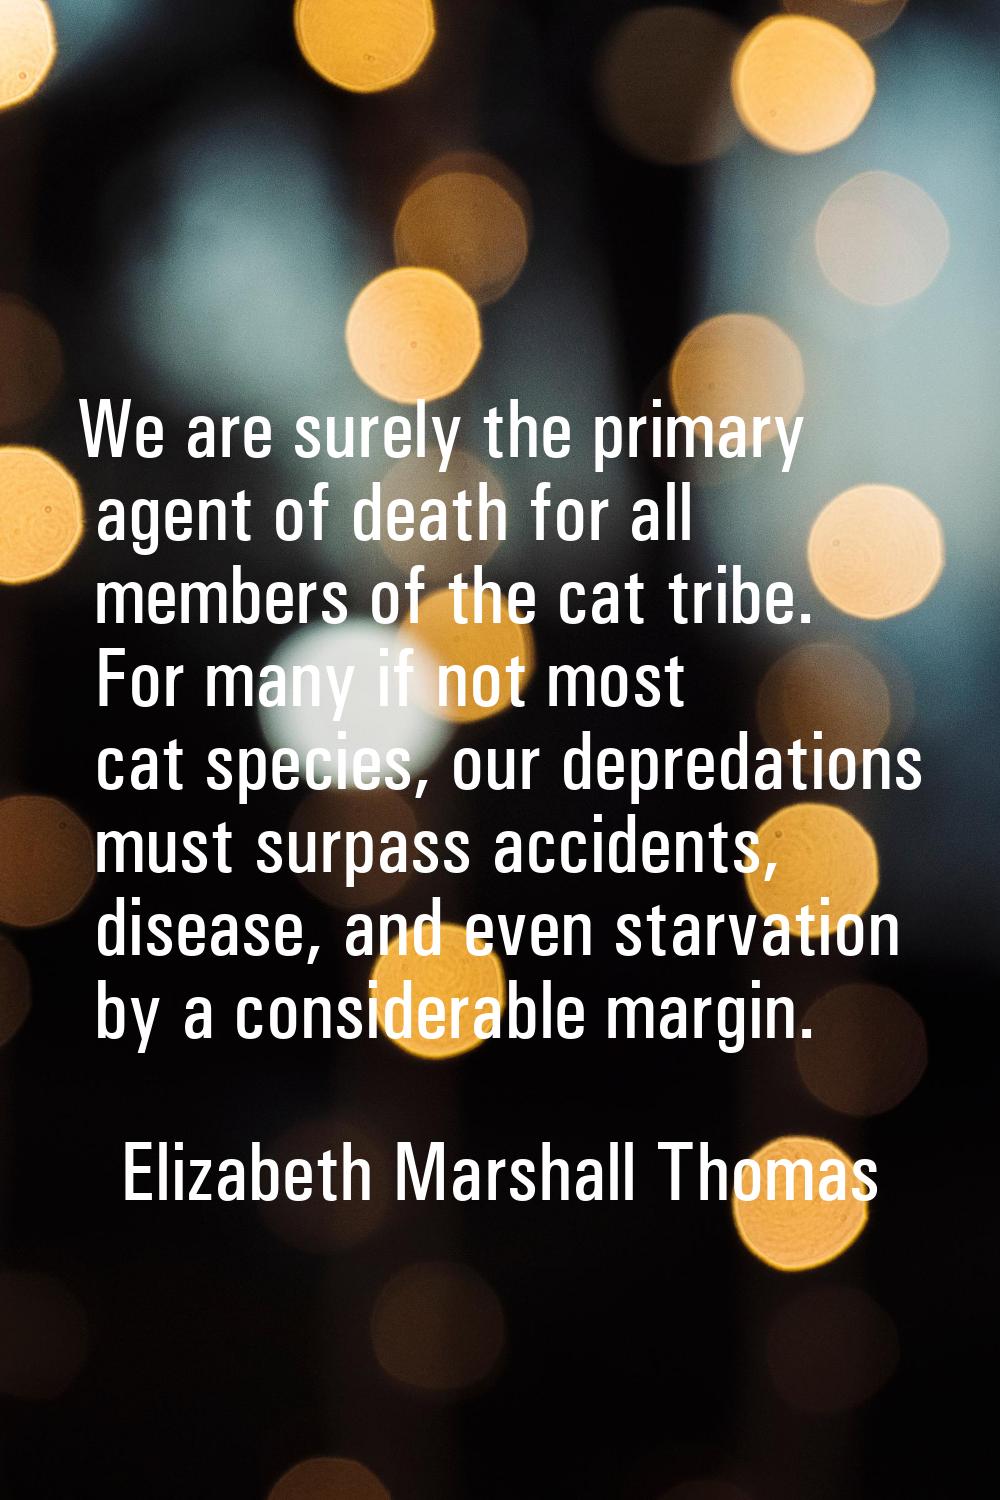 We are surely the primary agent of death for all members of the cat tribe. For many if not most cat